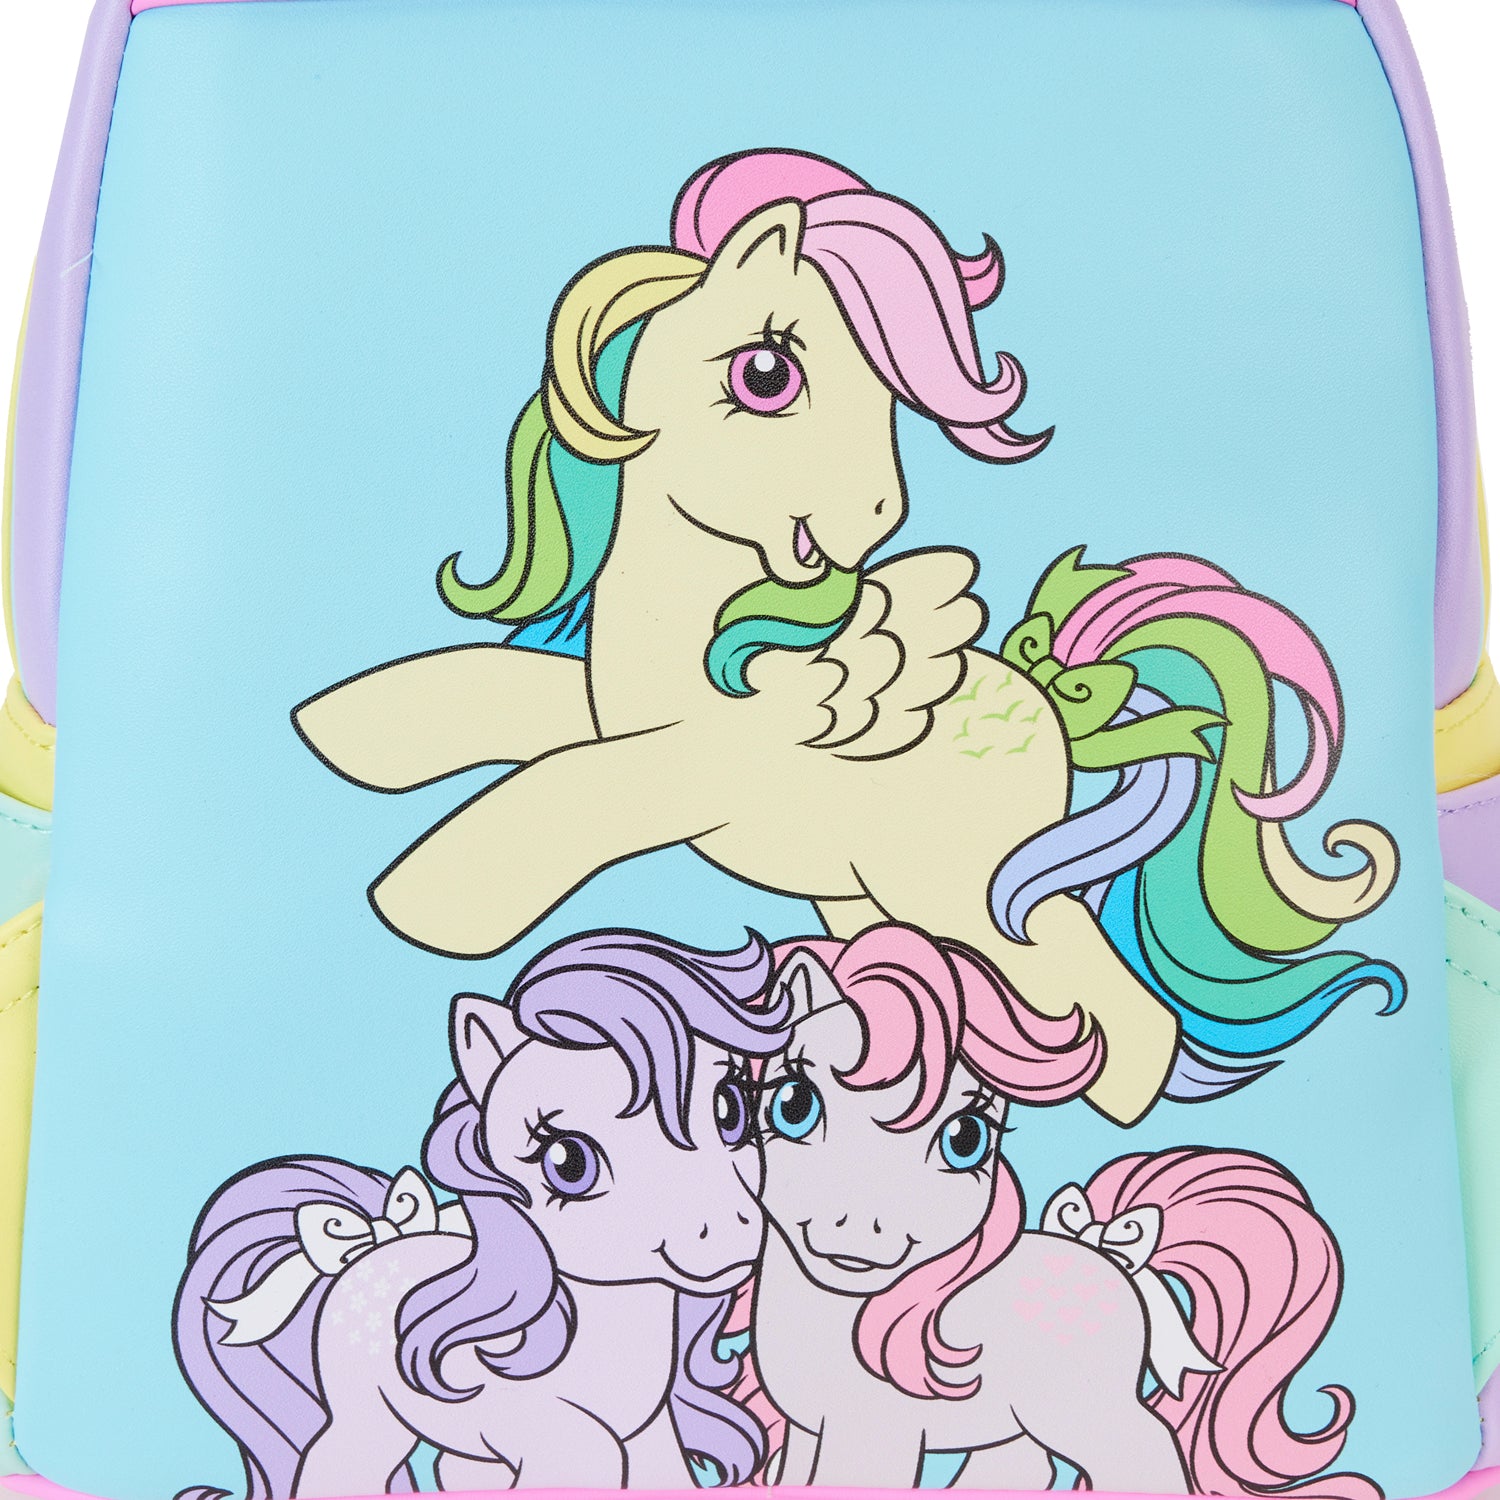 Loungefly Hasbro My Little Pony Color Block Mini Backpack